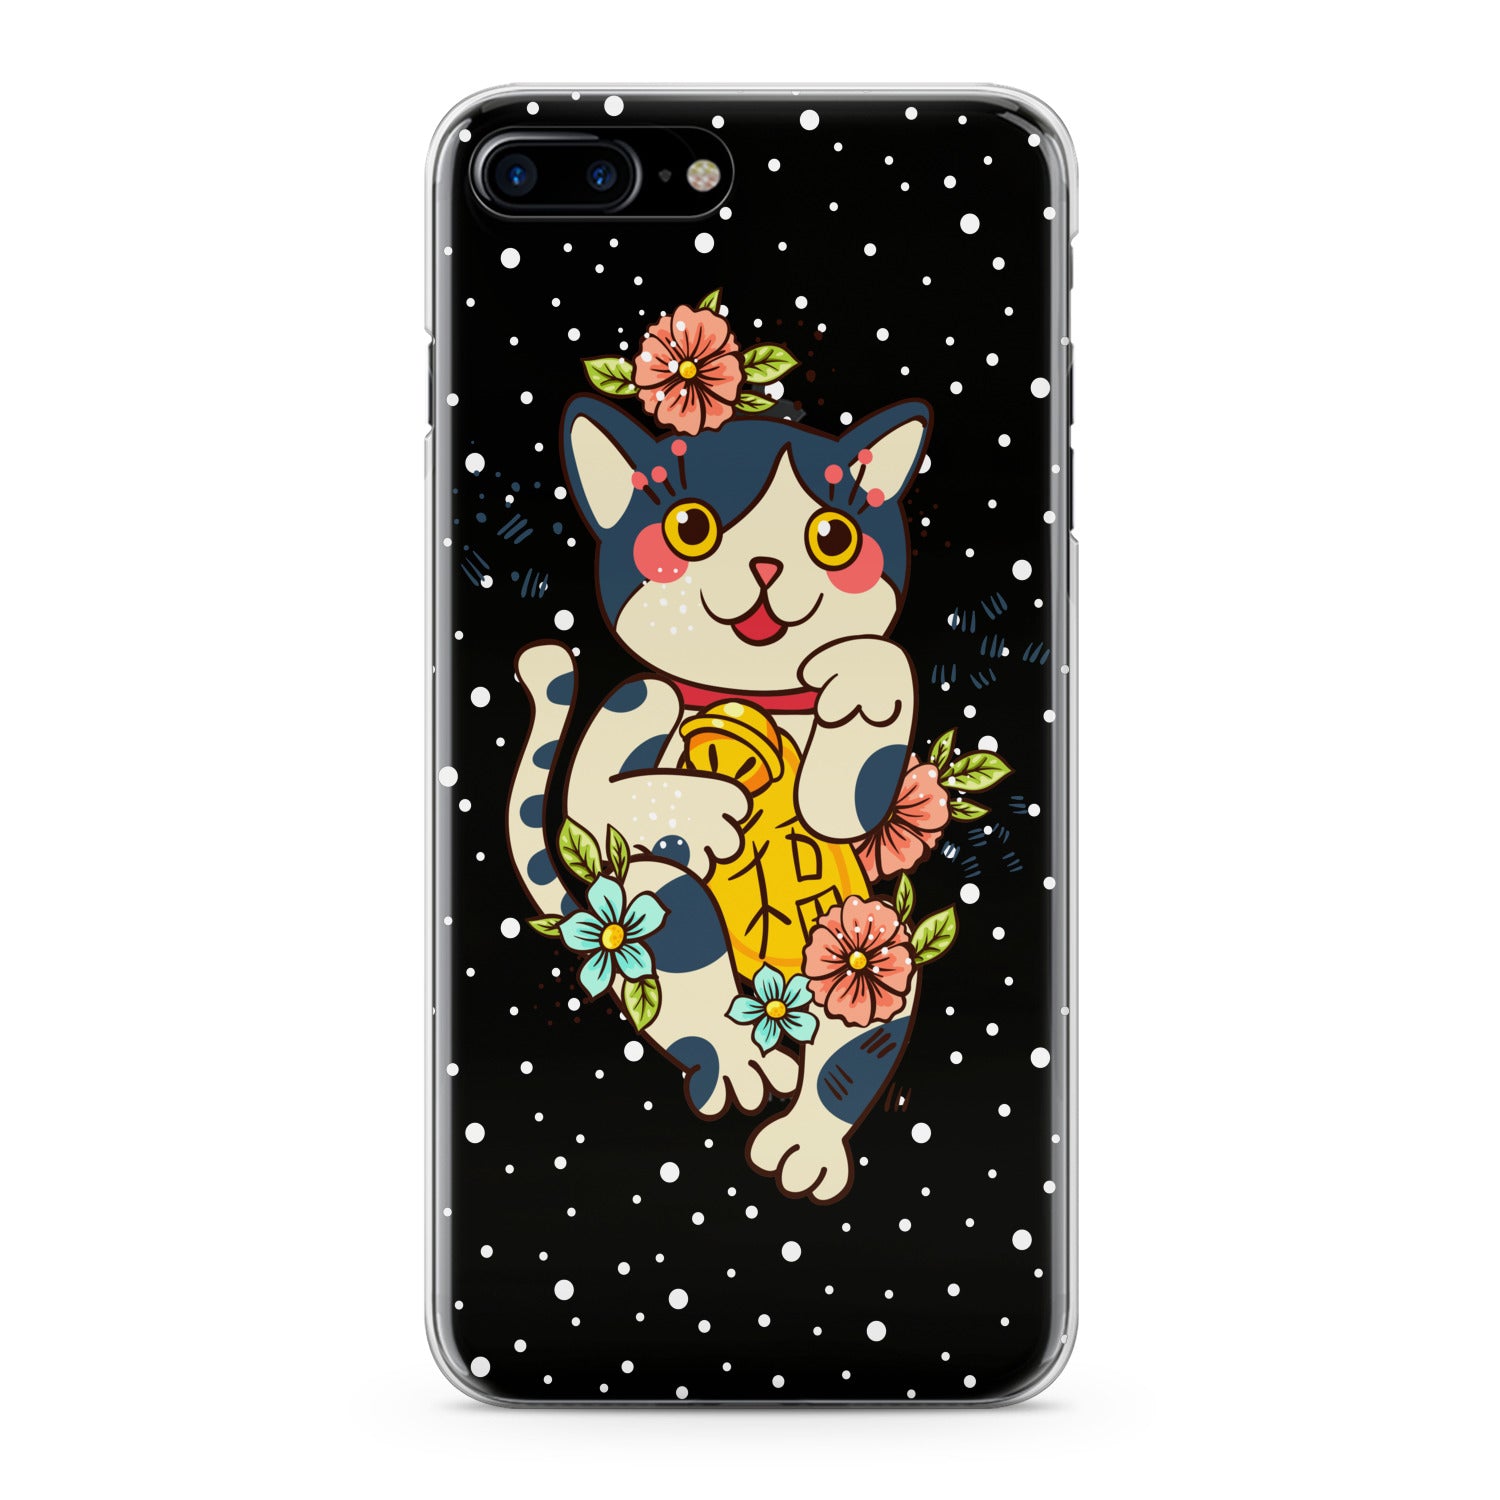 Lex Altern Cute Cat Phone Case for your iPhone & Android phone.